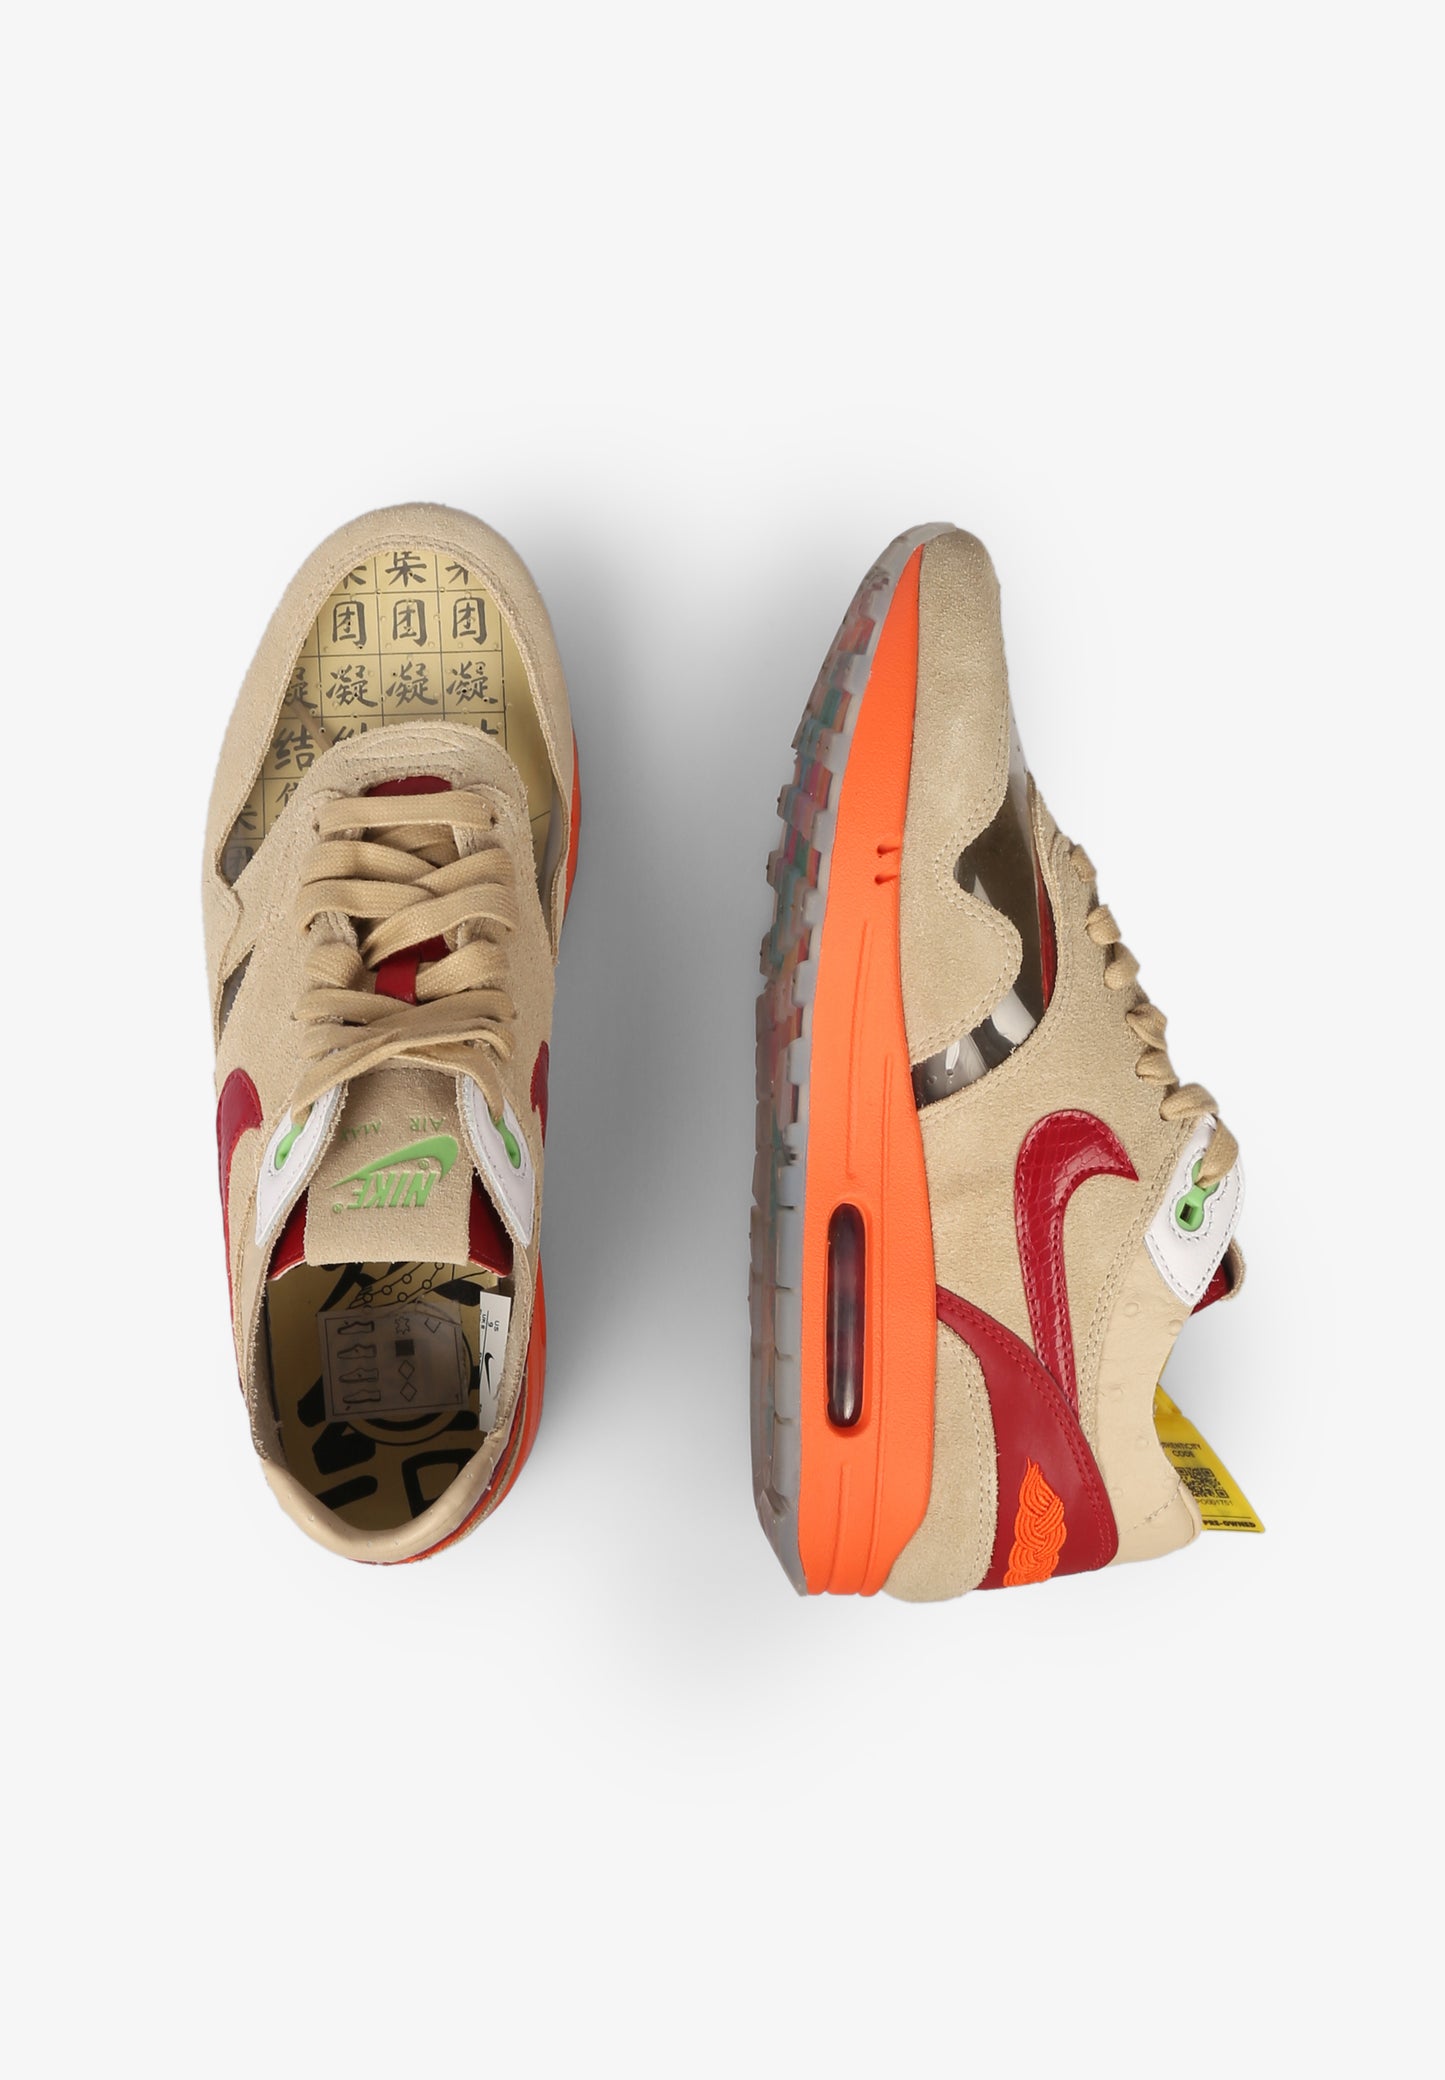 ARCHIVE SNEAKRS | SNEAKERS NIKE AIR MAX 1 CLOT KISS OF DEATH 2021 TALLA 42.5